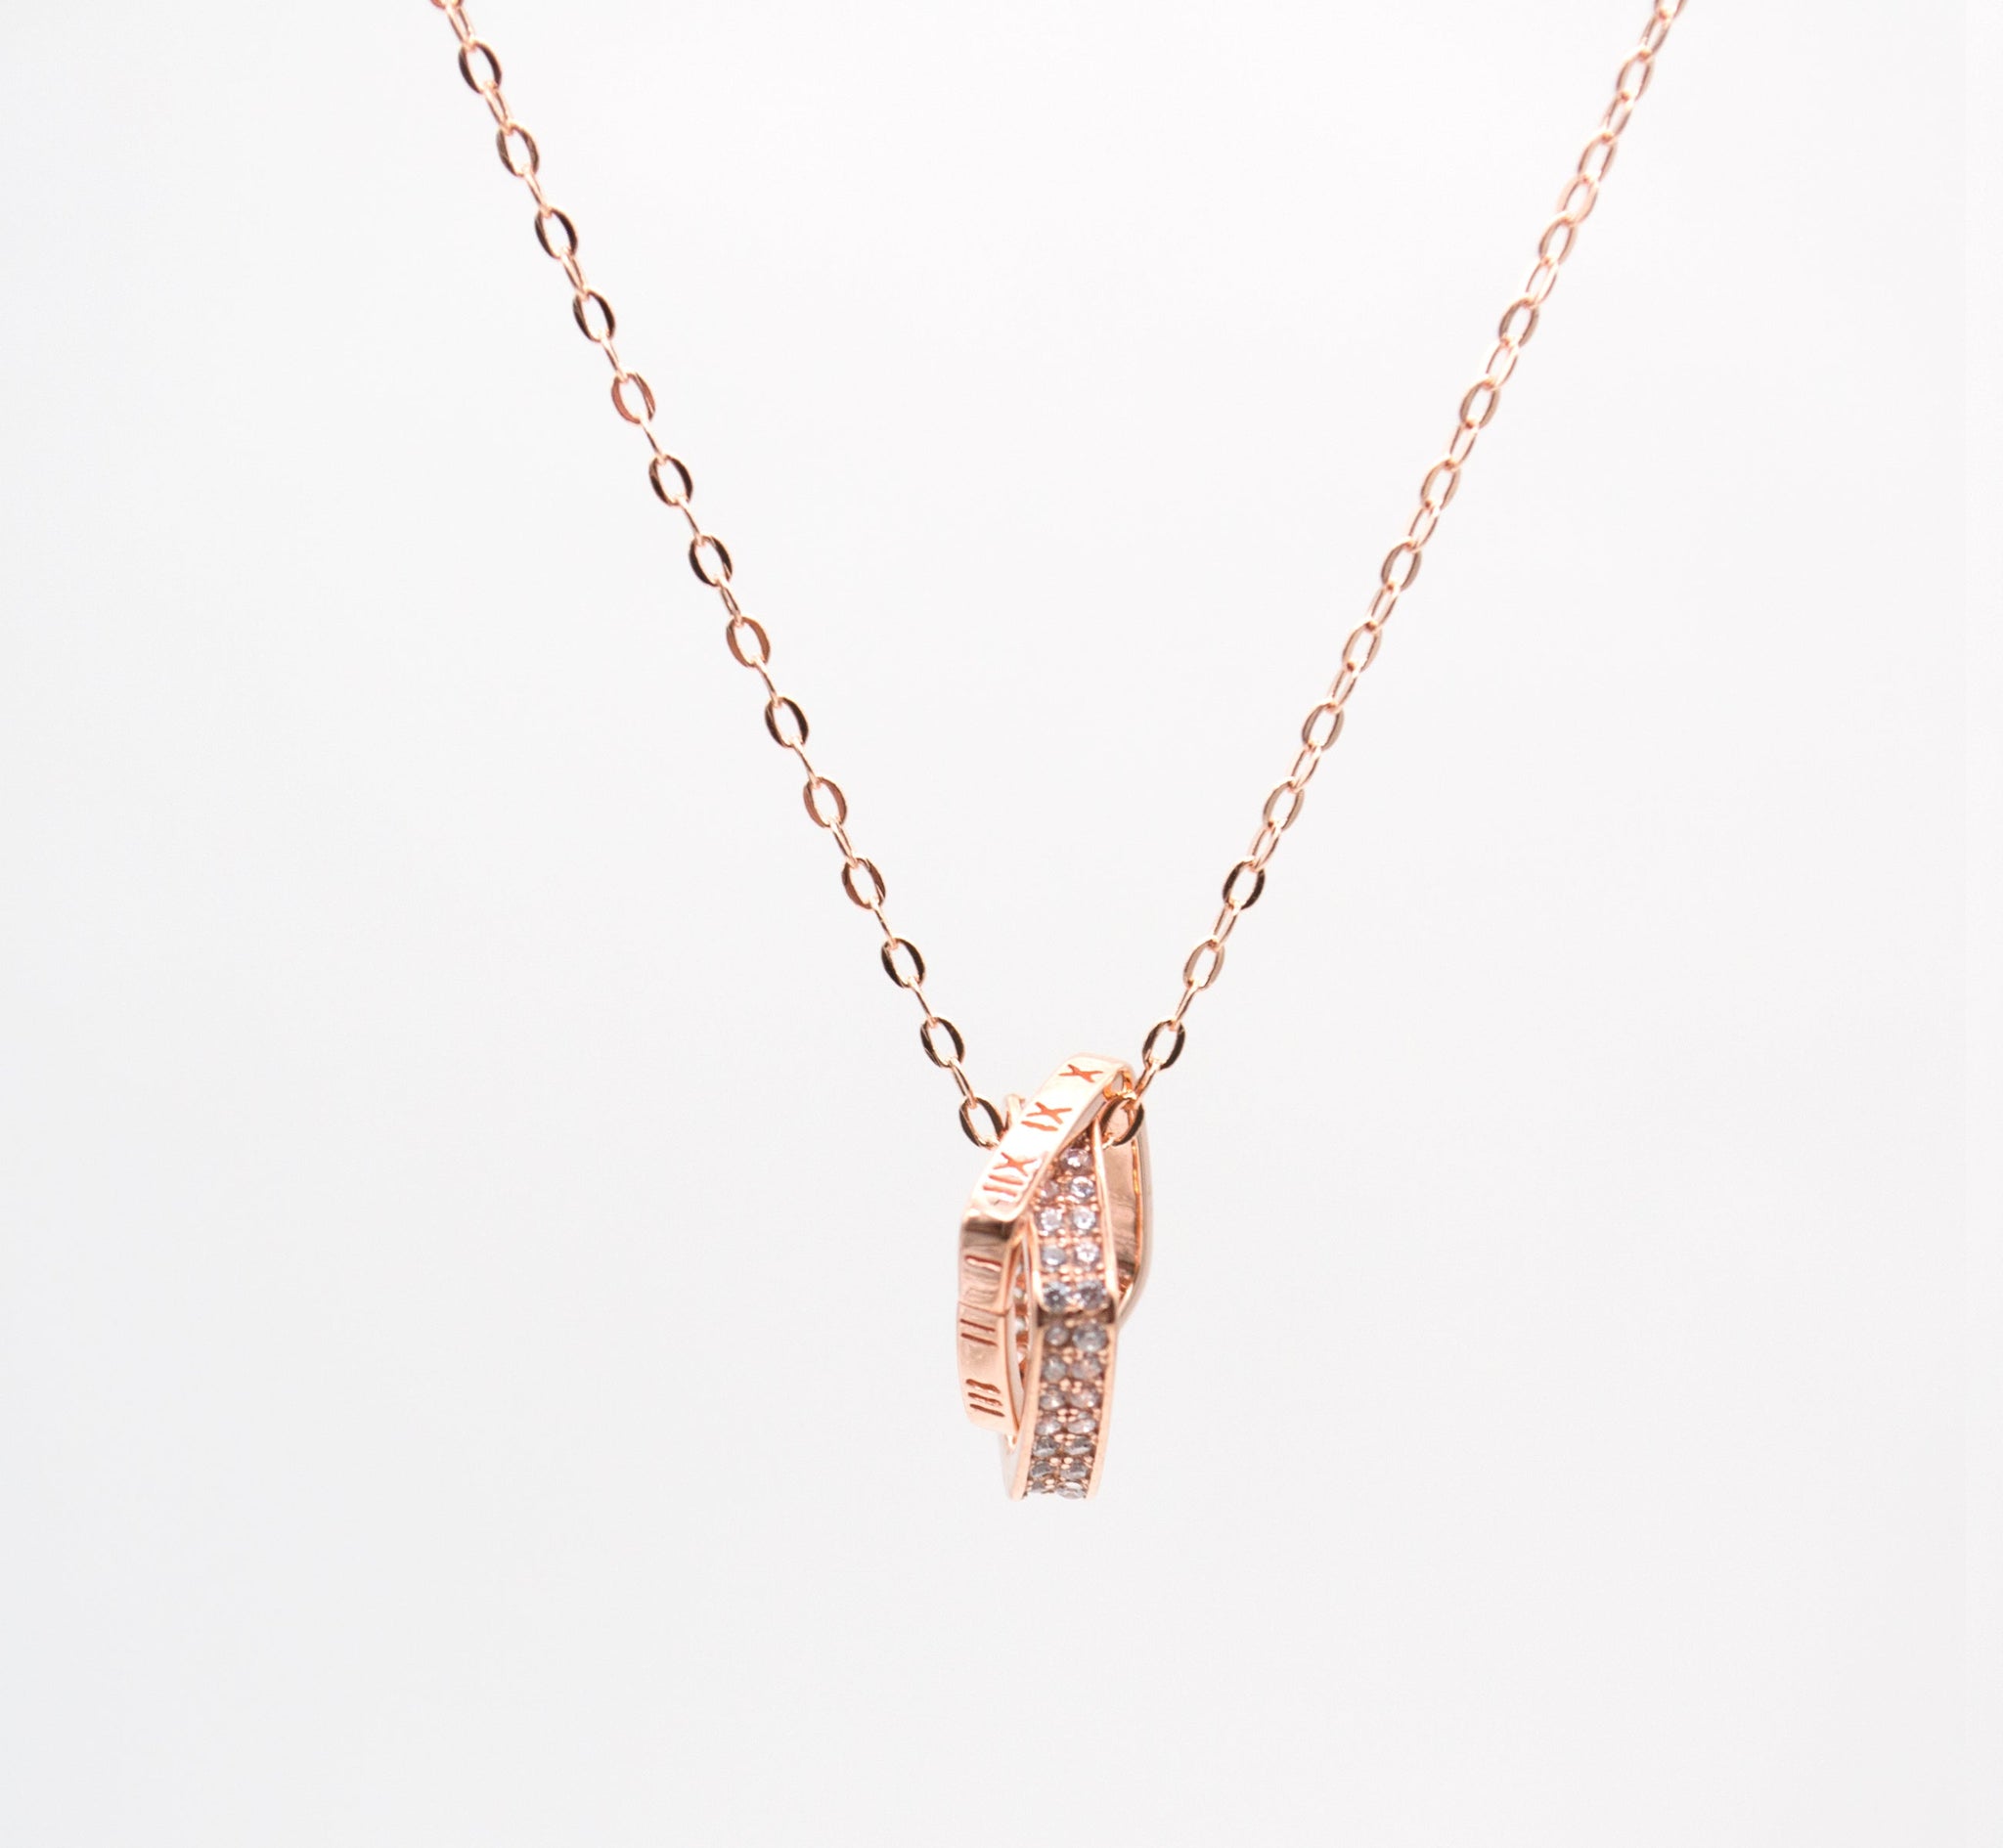 Jewdii 925 Silver Pendant Necklace with Rose Gold Plating